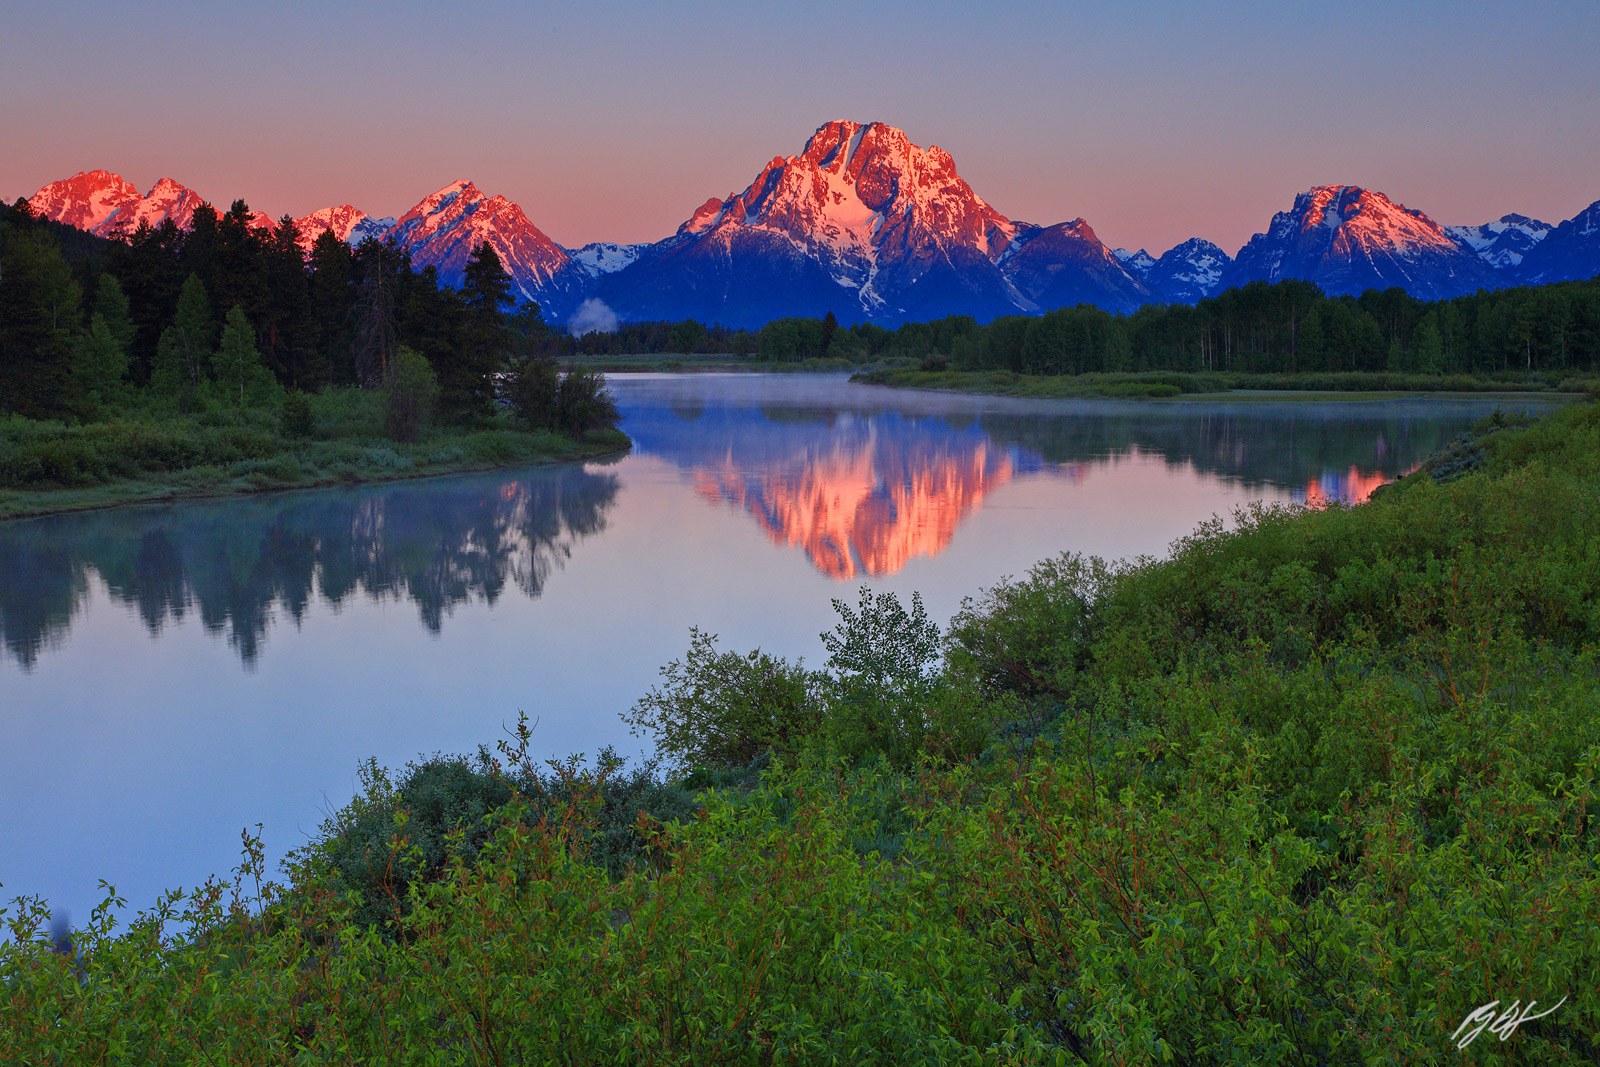 Sunrise Grand Tetons from Oxbow Bend in Grand Teton National Park in Wyoming